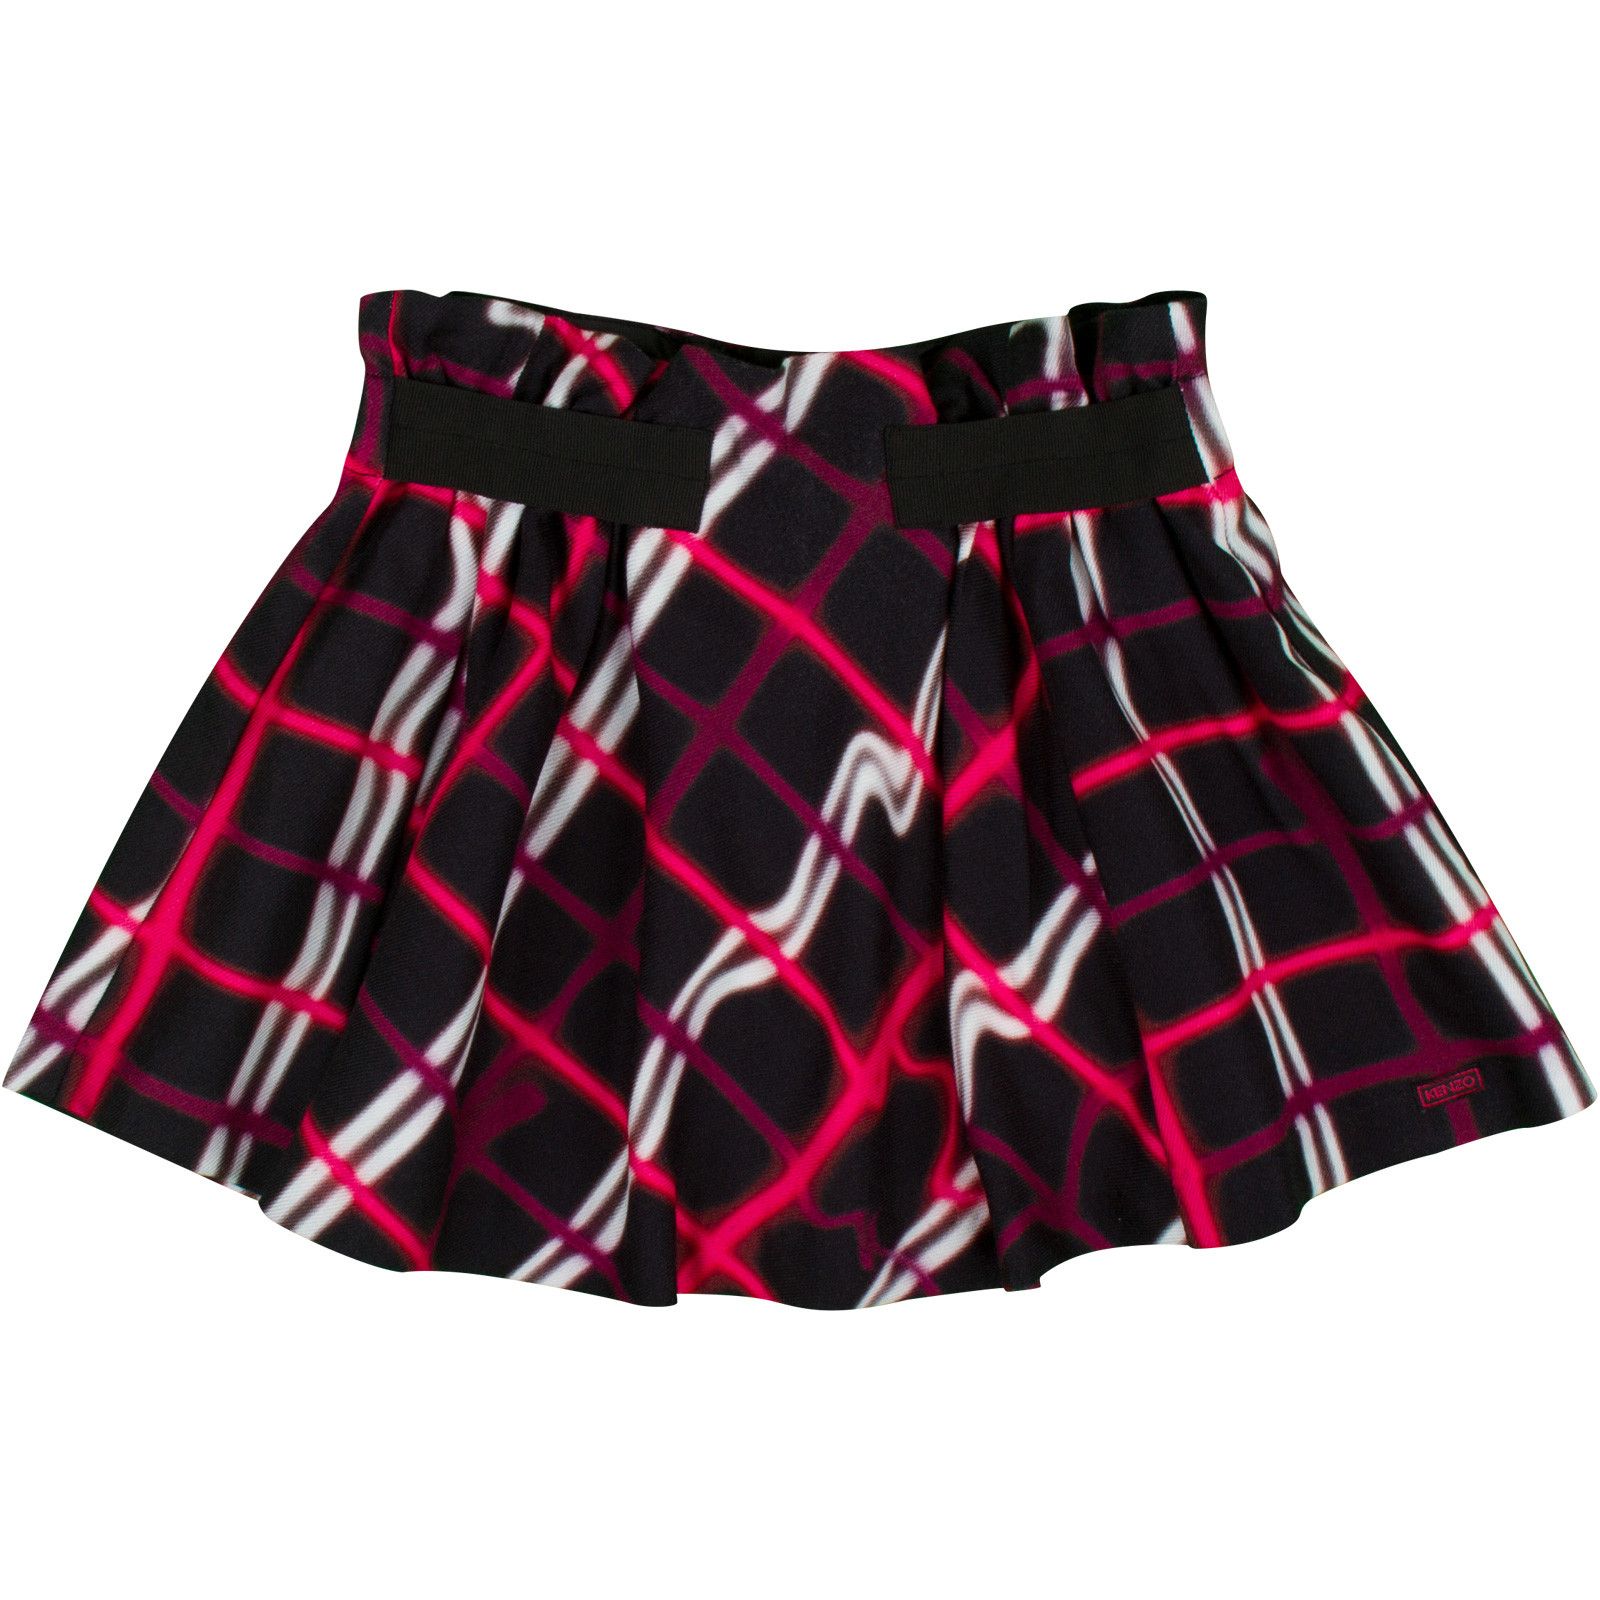 Girls Black Skirt With Red&White Check Printed - CÉMAROSE | Children's Fashion Store - 1